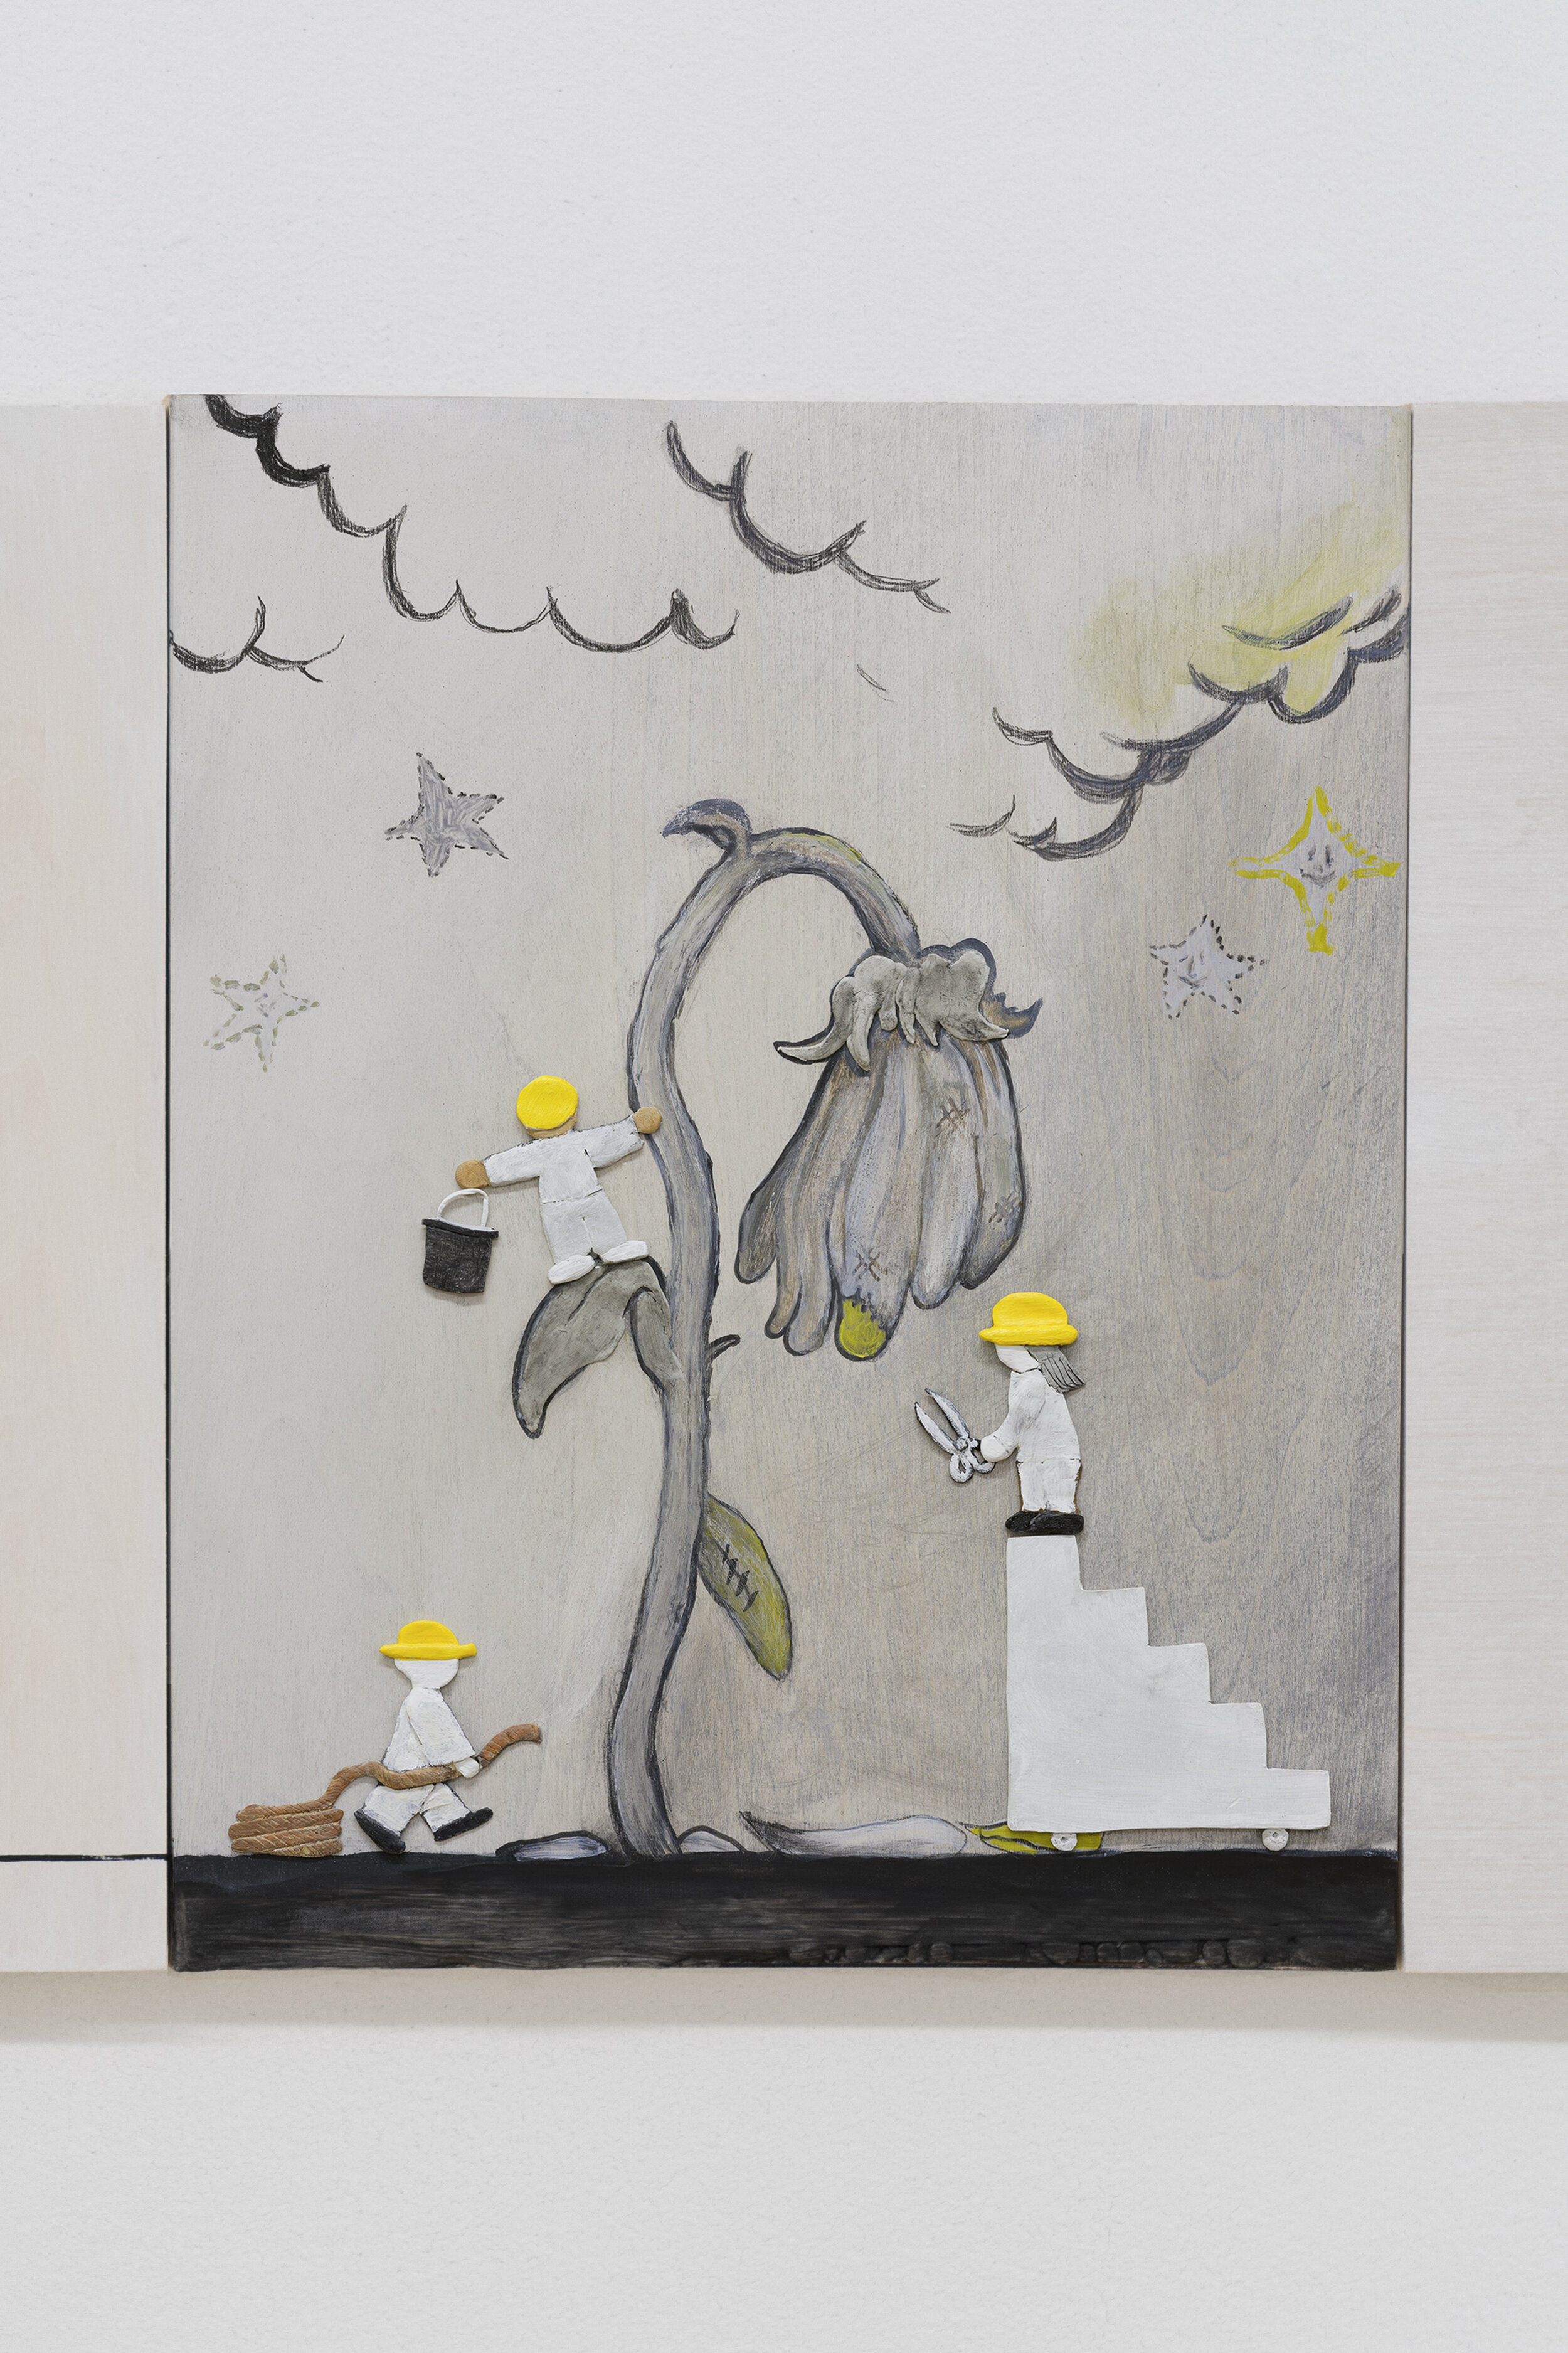  Dennis Witkin  Repairing Flower,  2020 Oil paint, acrylic paint, cal-tint, wood-stain, charcoal, graphite, epoxy clay, polymer clay on panel 14 x 11 inches 